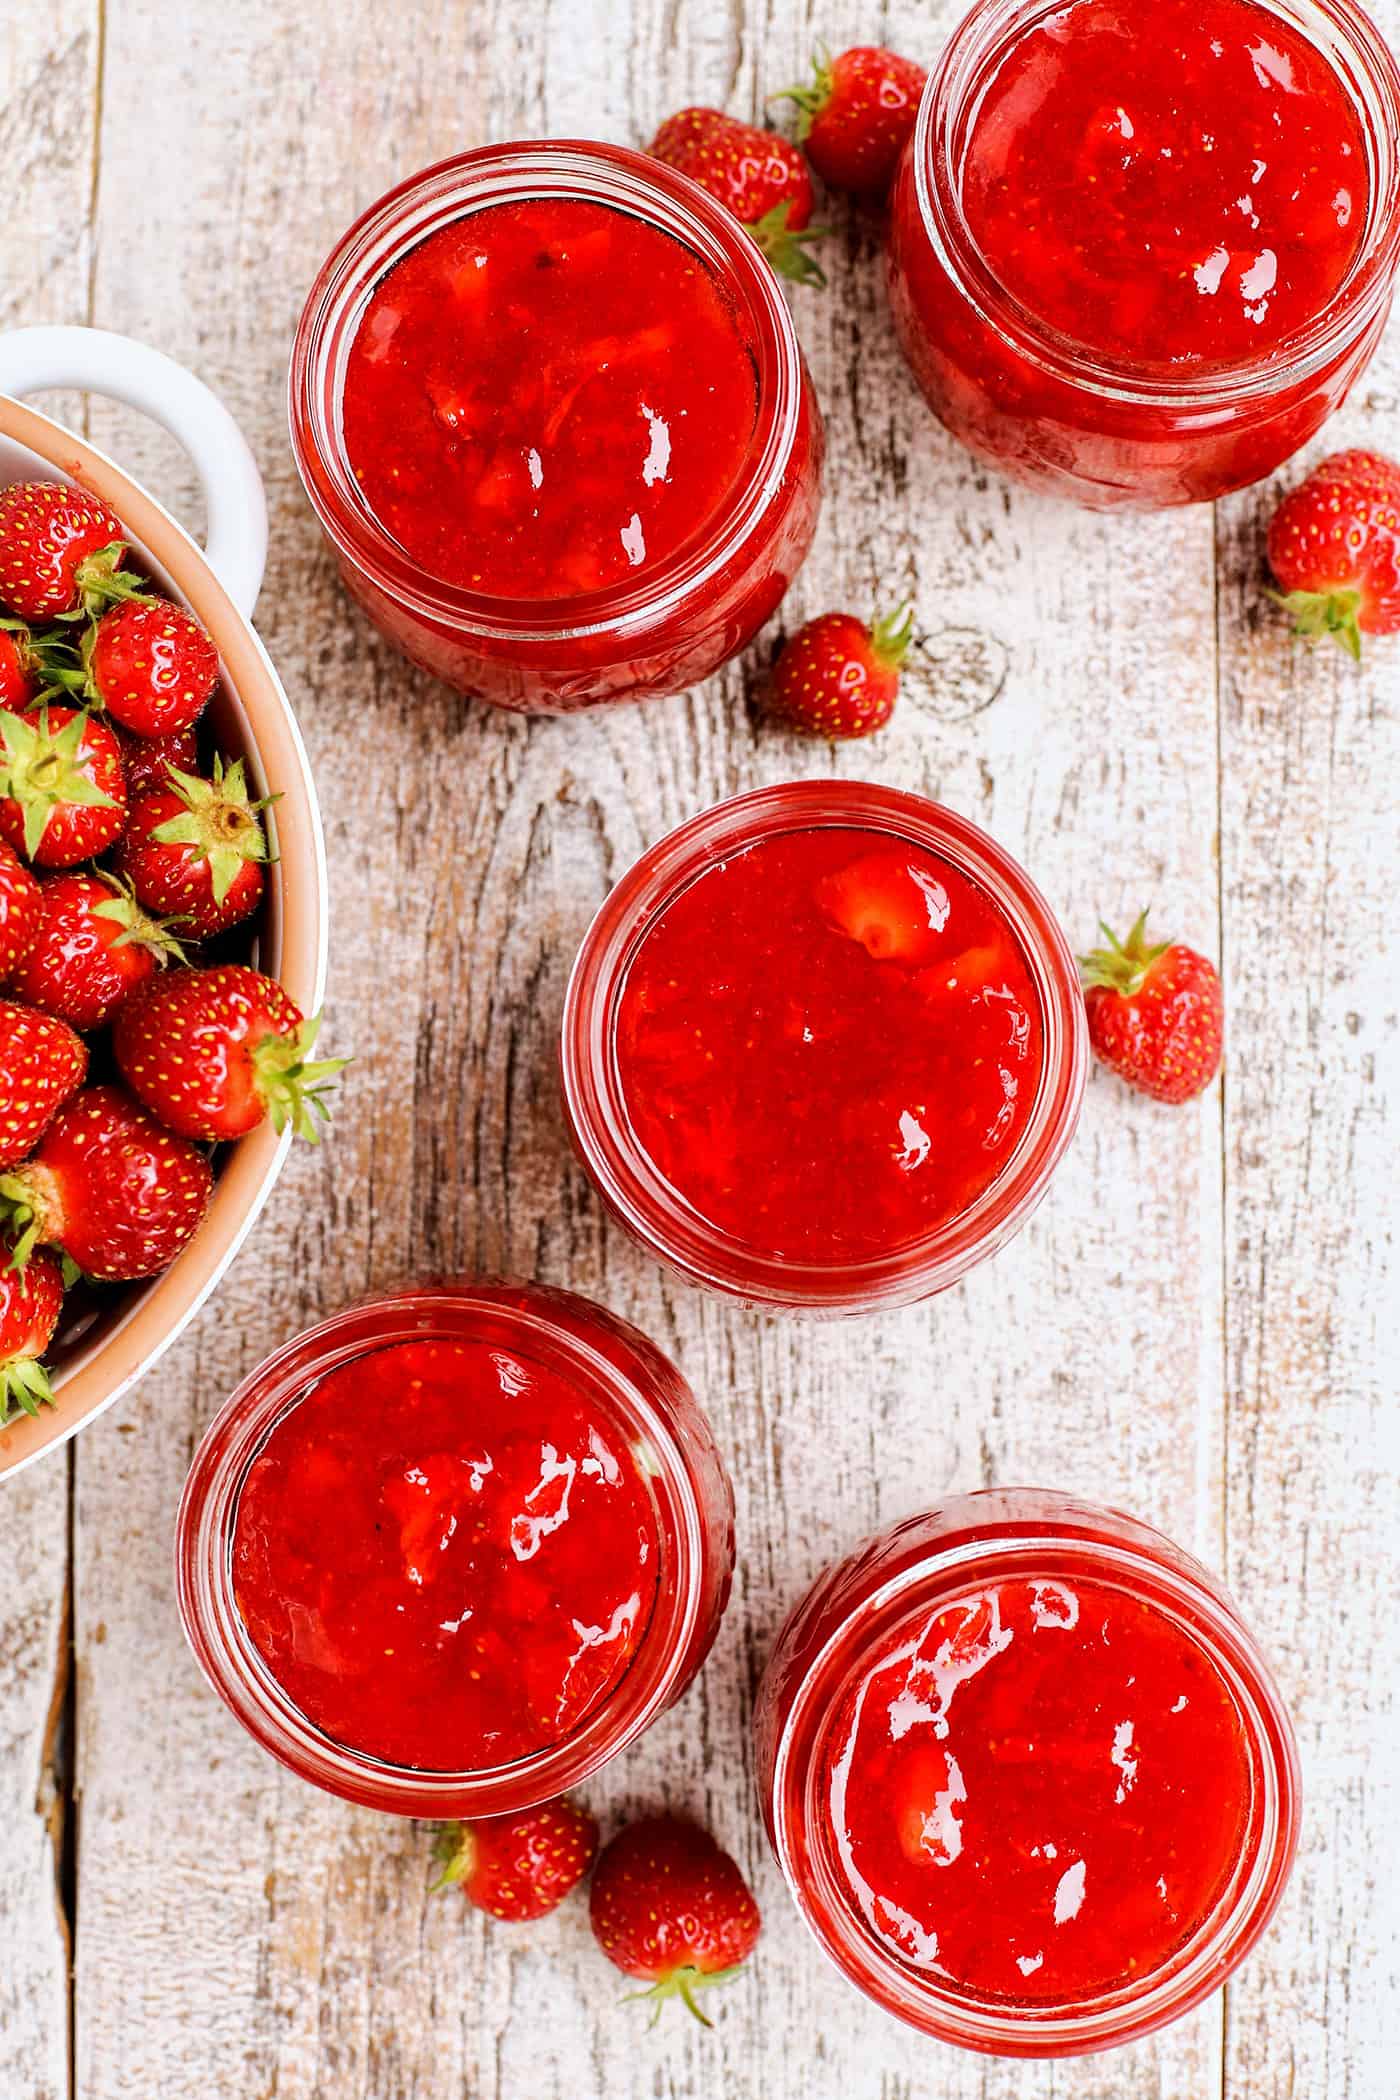 Jars of strawberry jam on a wood table next to a bowl of berries